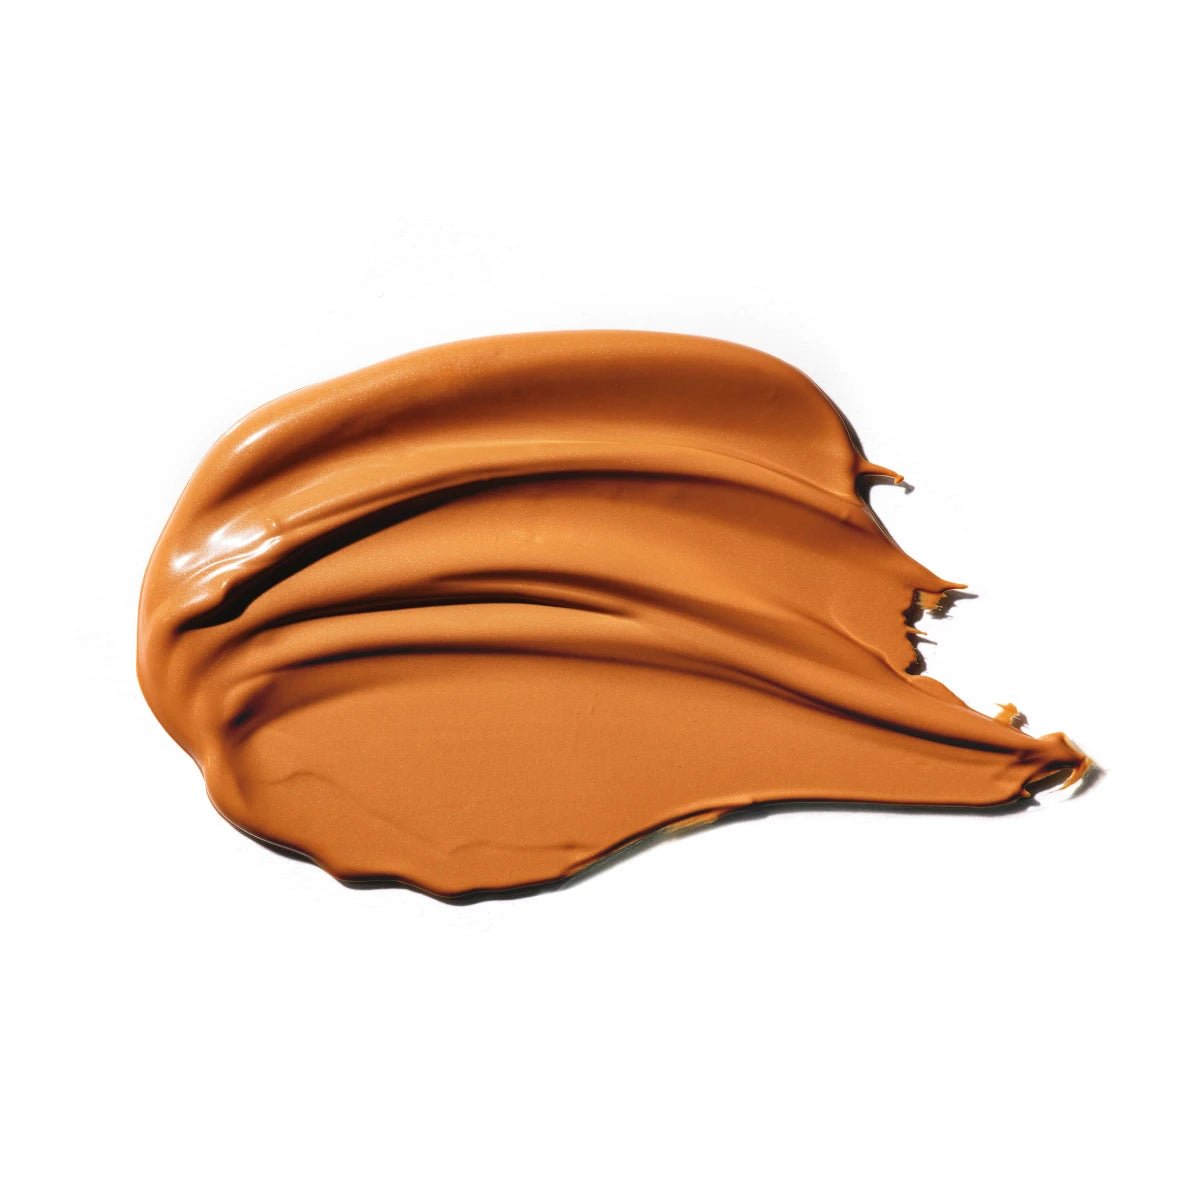 100% Pure BB Cream swatch in Shade 30 Radiance